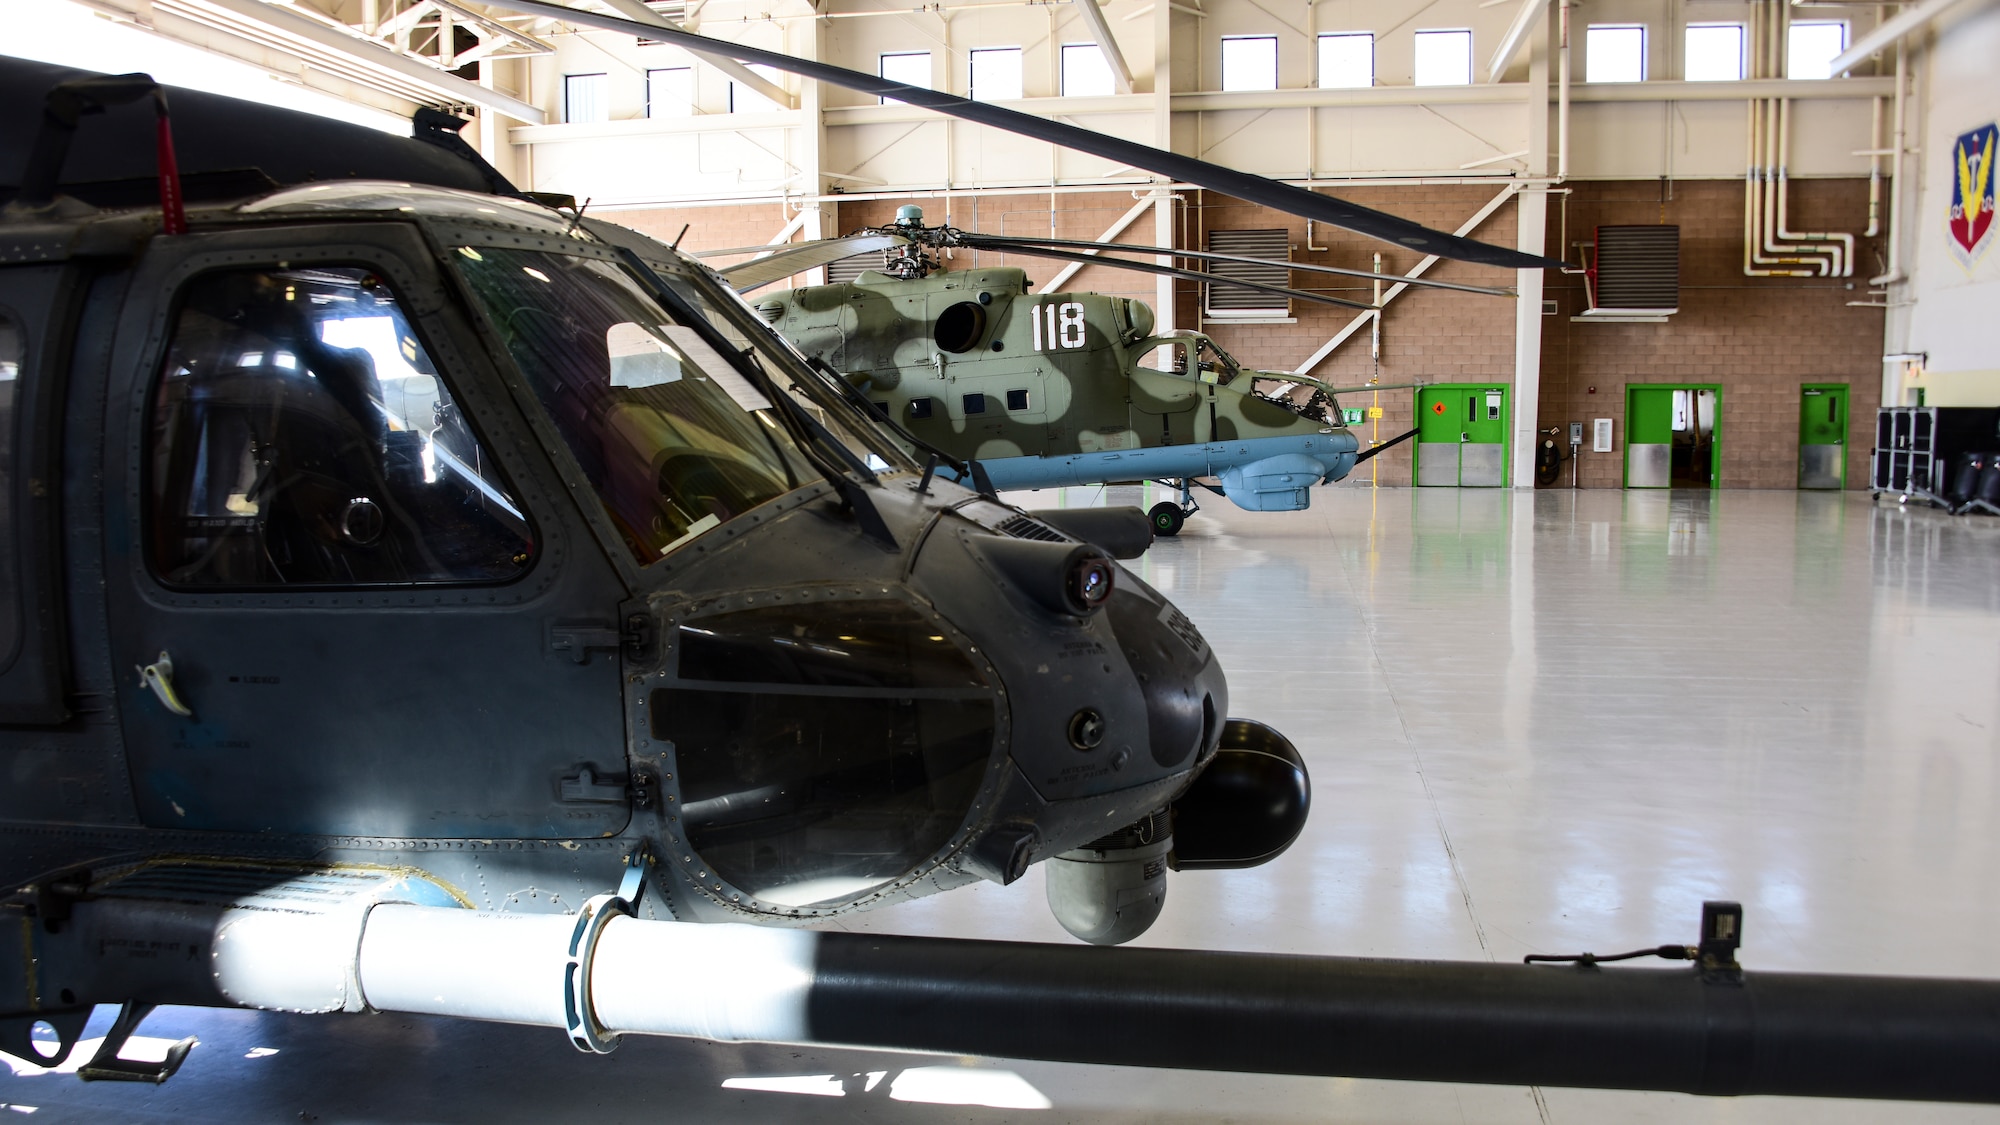 Helicopters sit in hangar